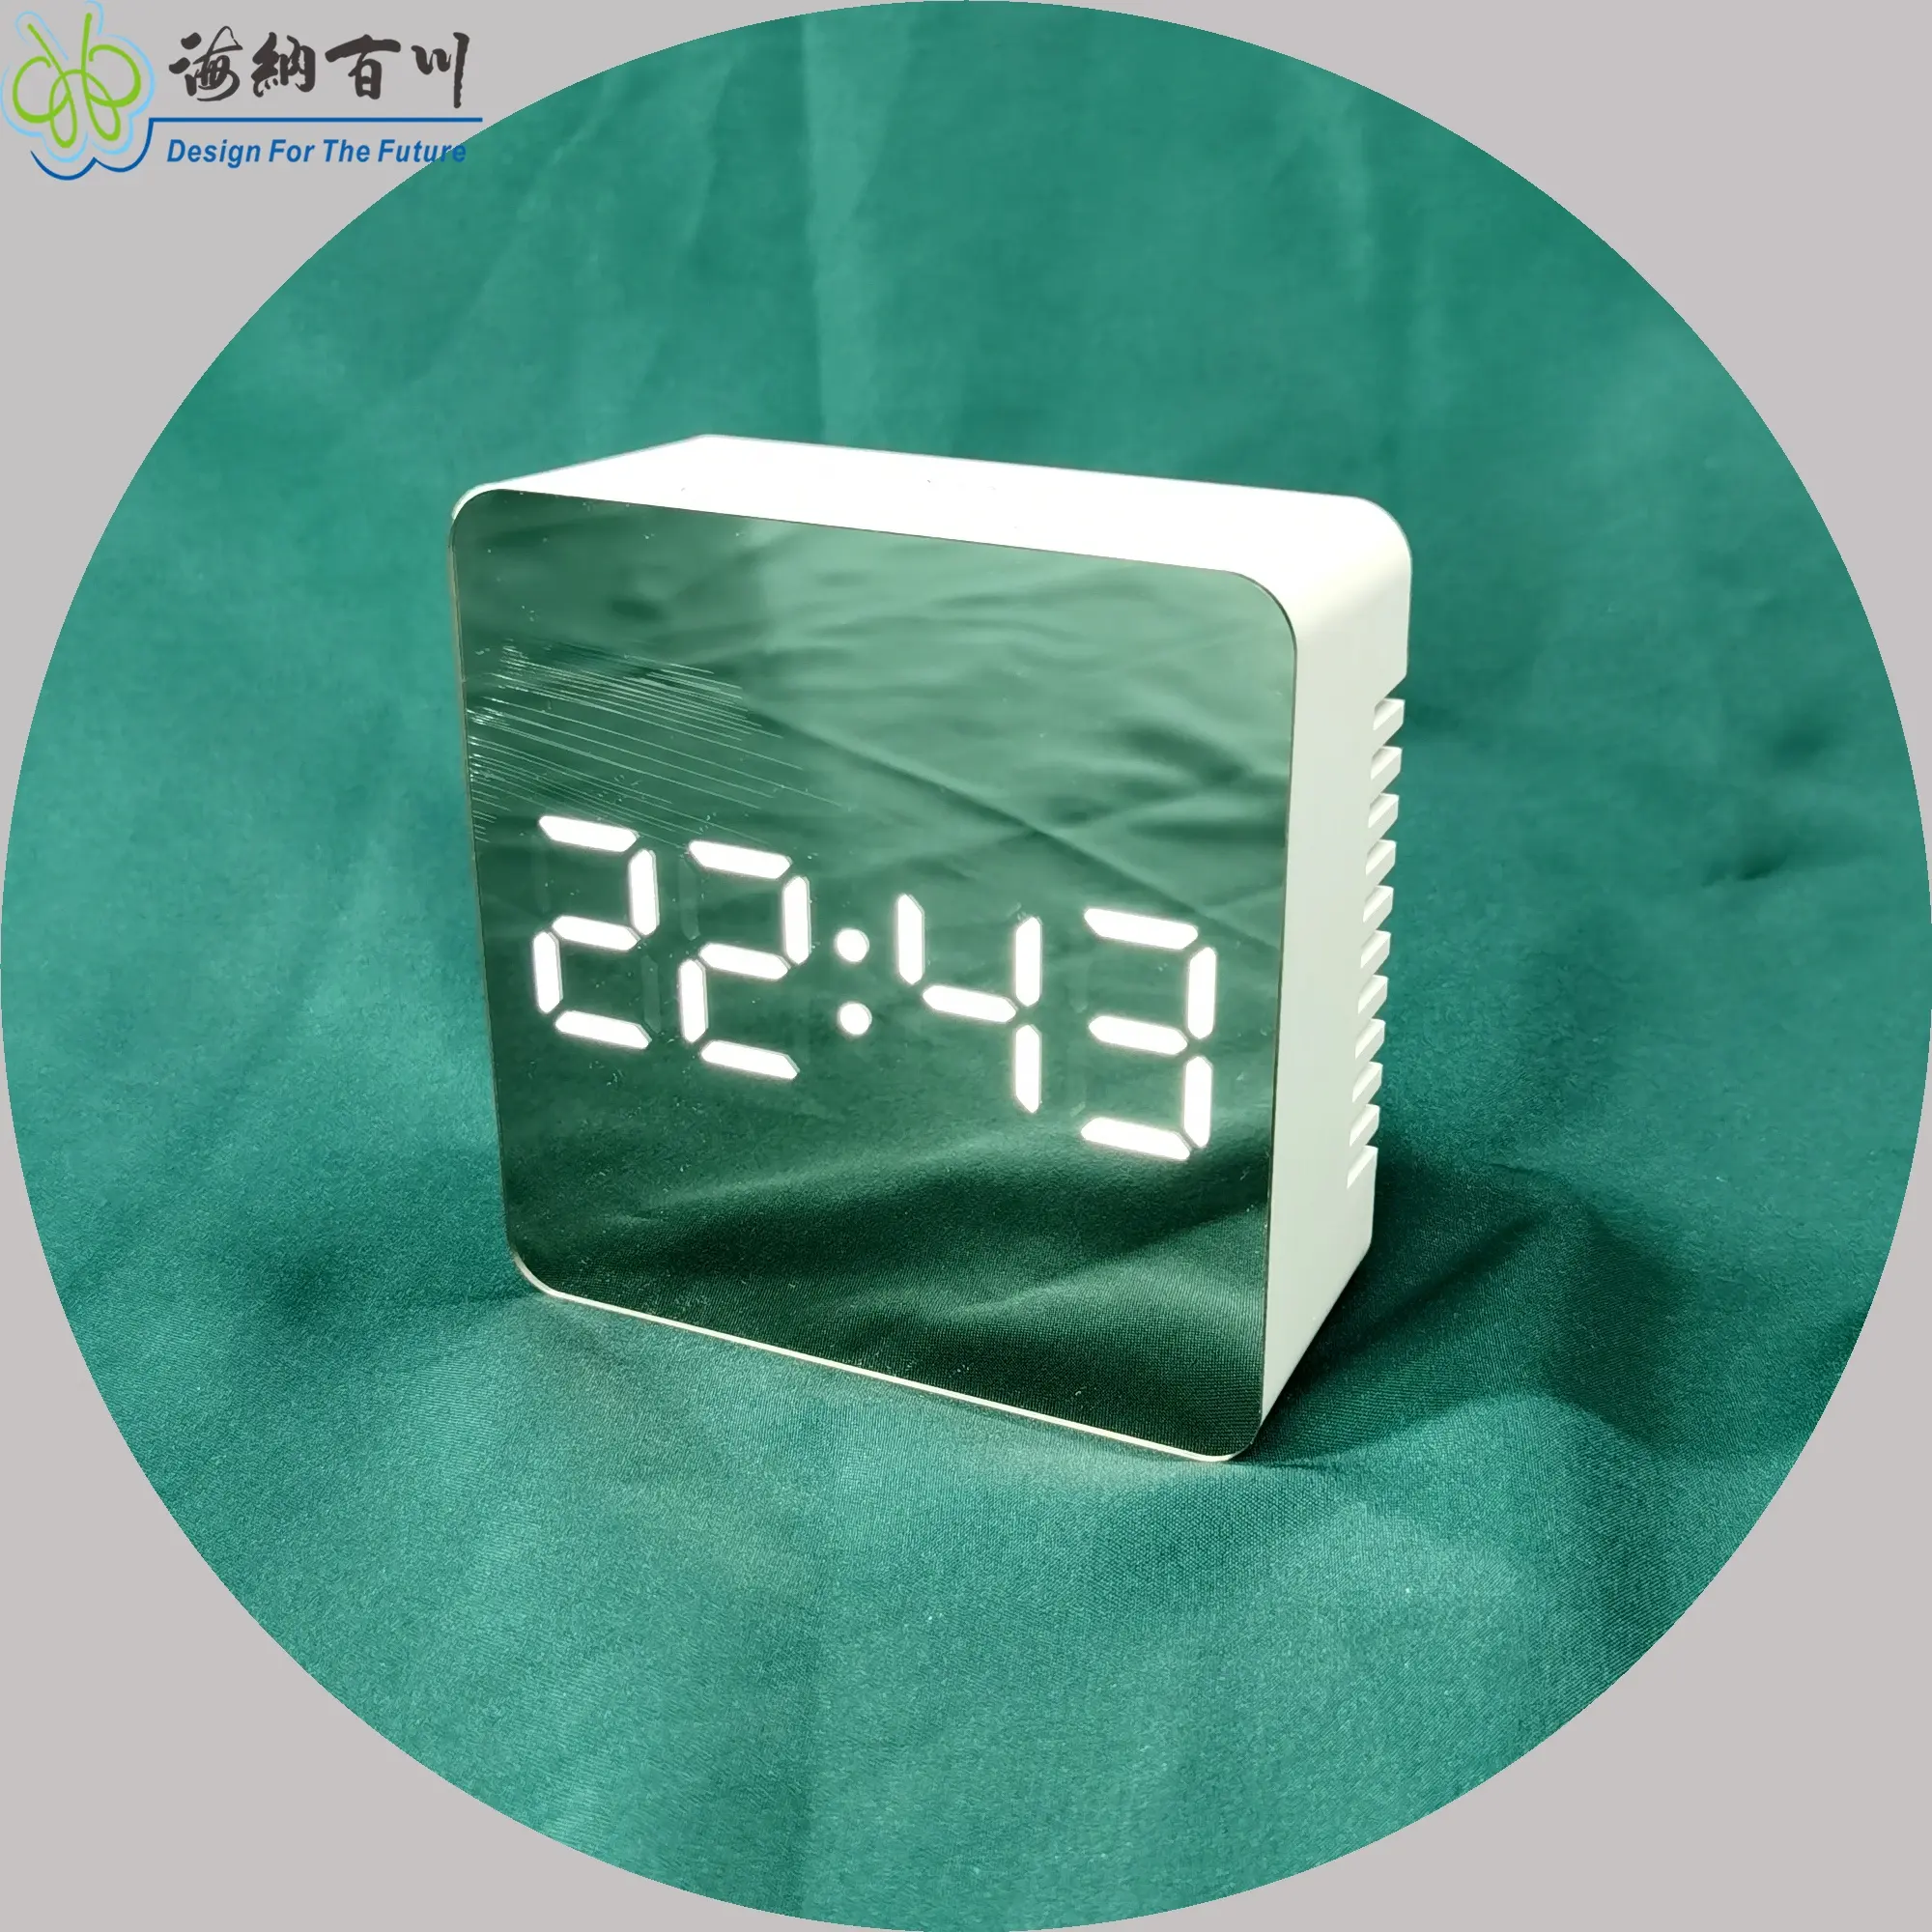 Digital table LED clock Time /Temperature display Function button:MODE ALARM SNZ / LIGHT UP DOWN